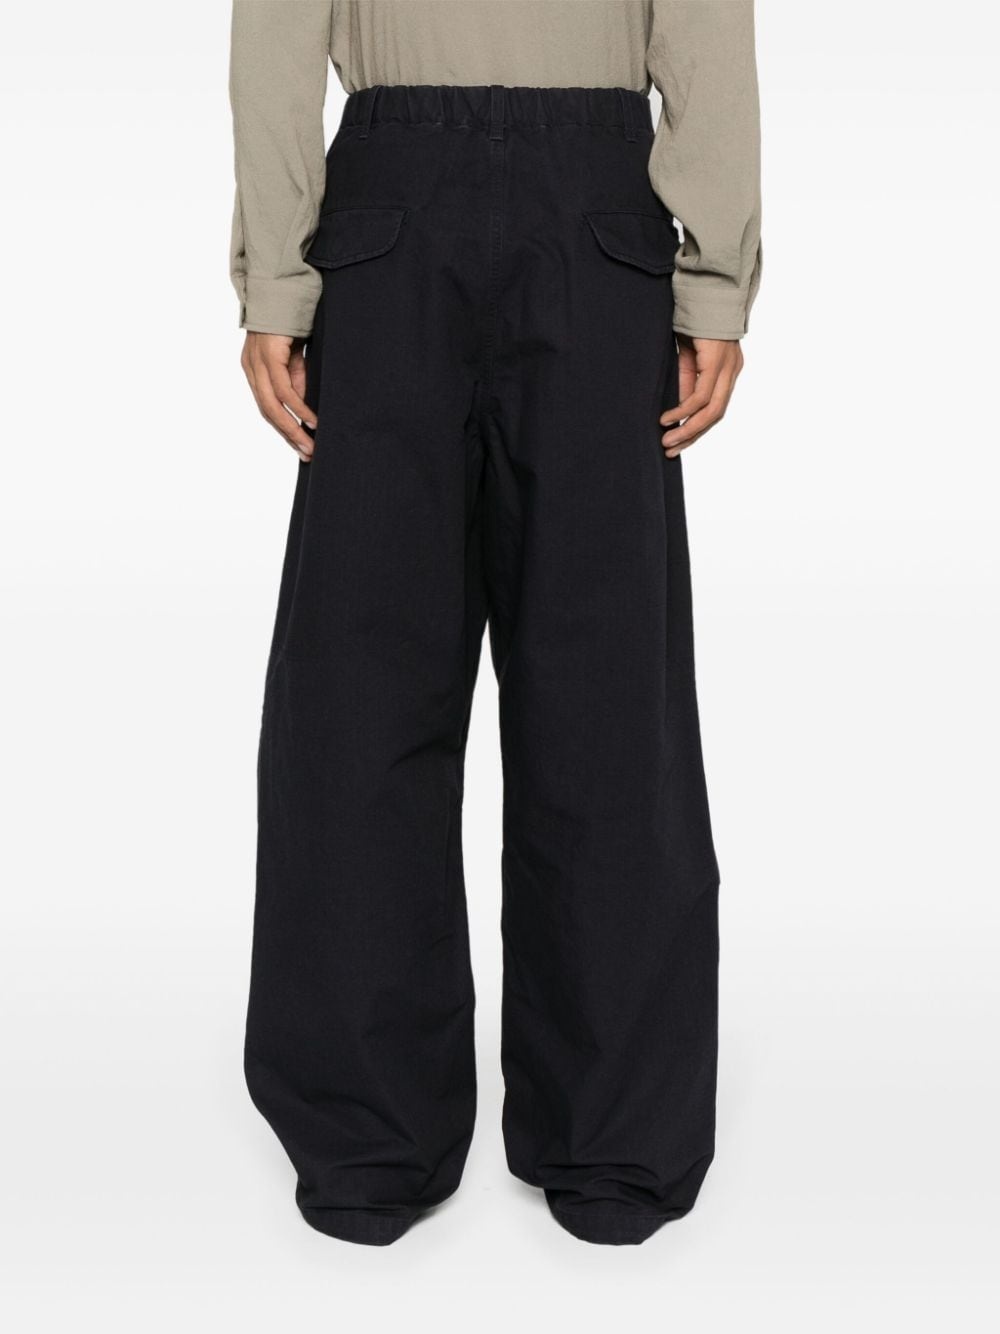 ripstop cotton trousers - 4